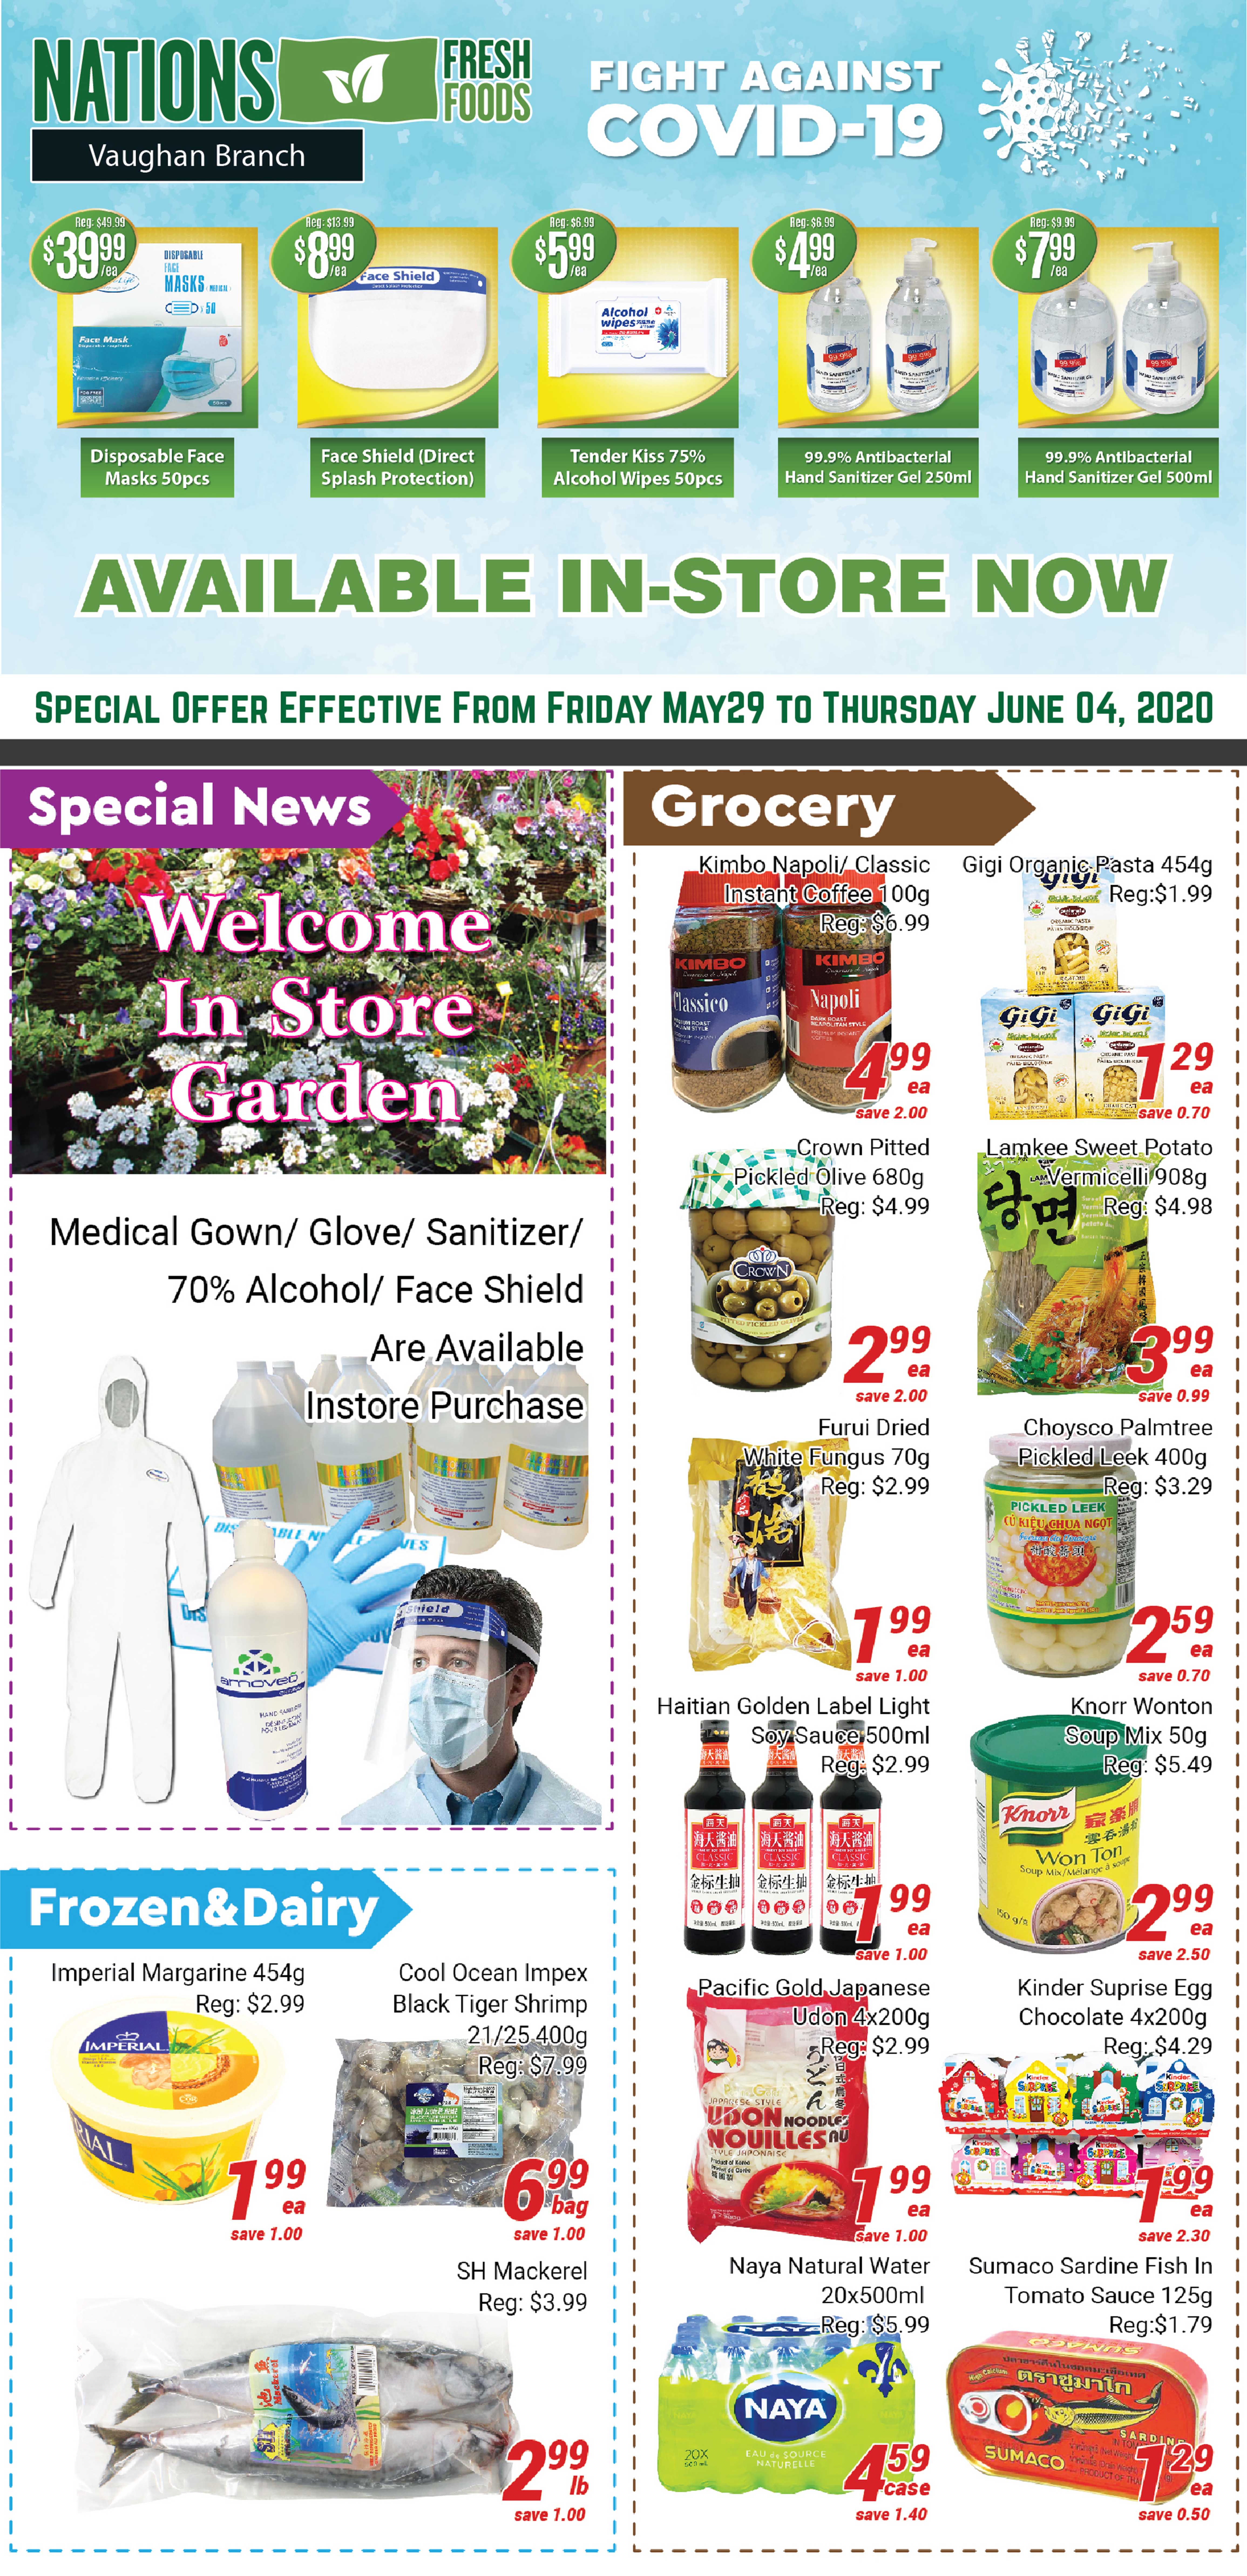 nations-fresh-foods-flyer-thursday-may-28-2020-2020-5-31